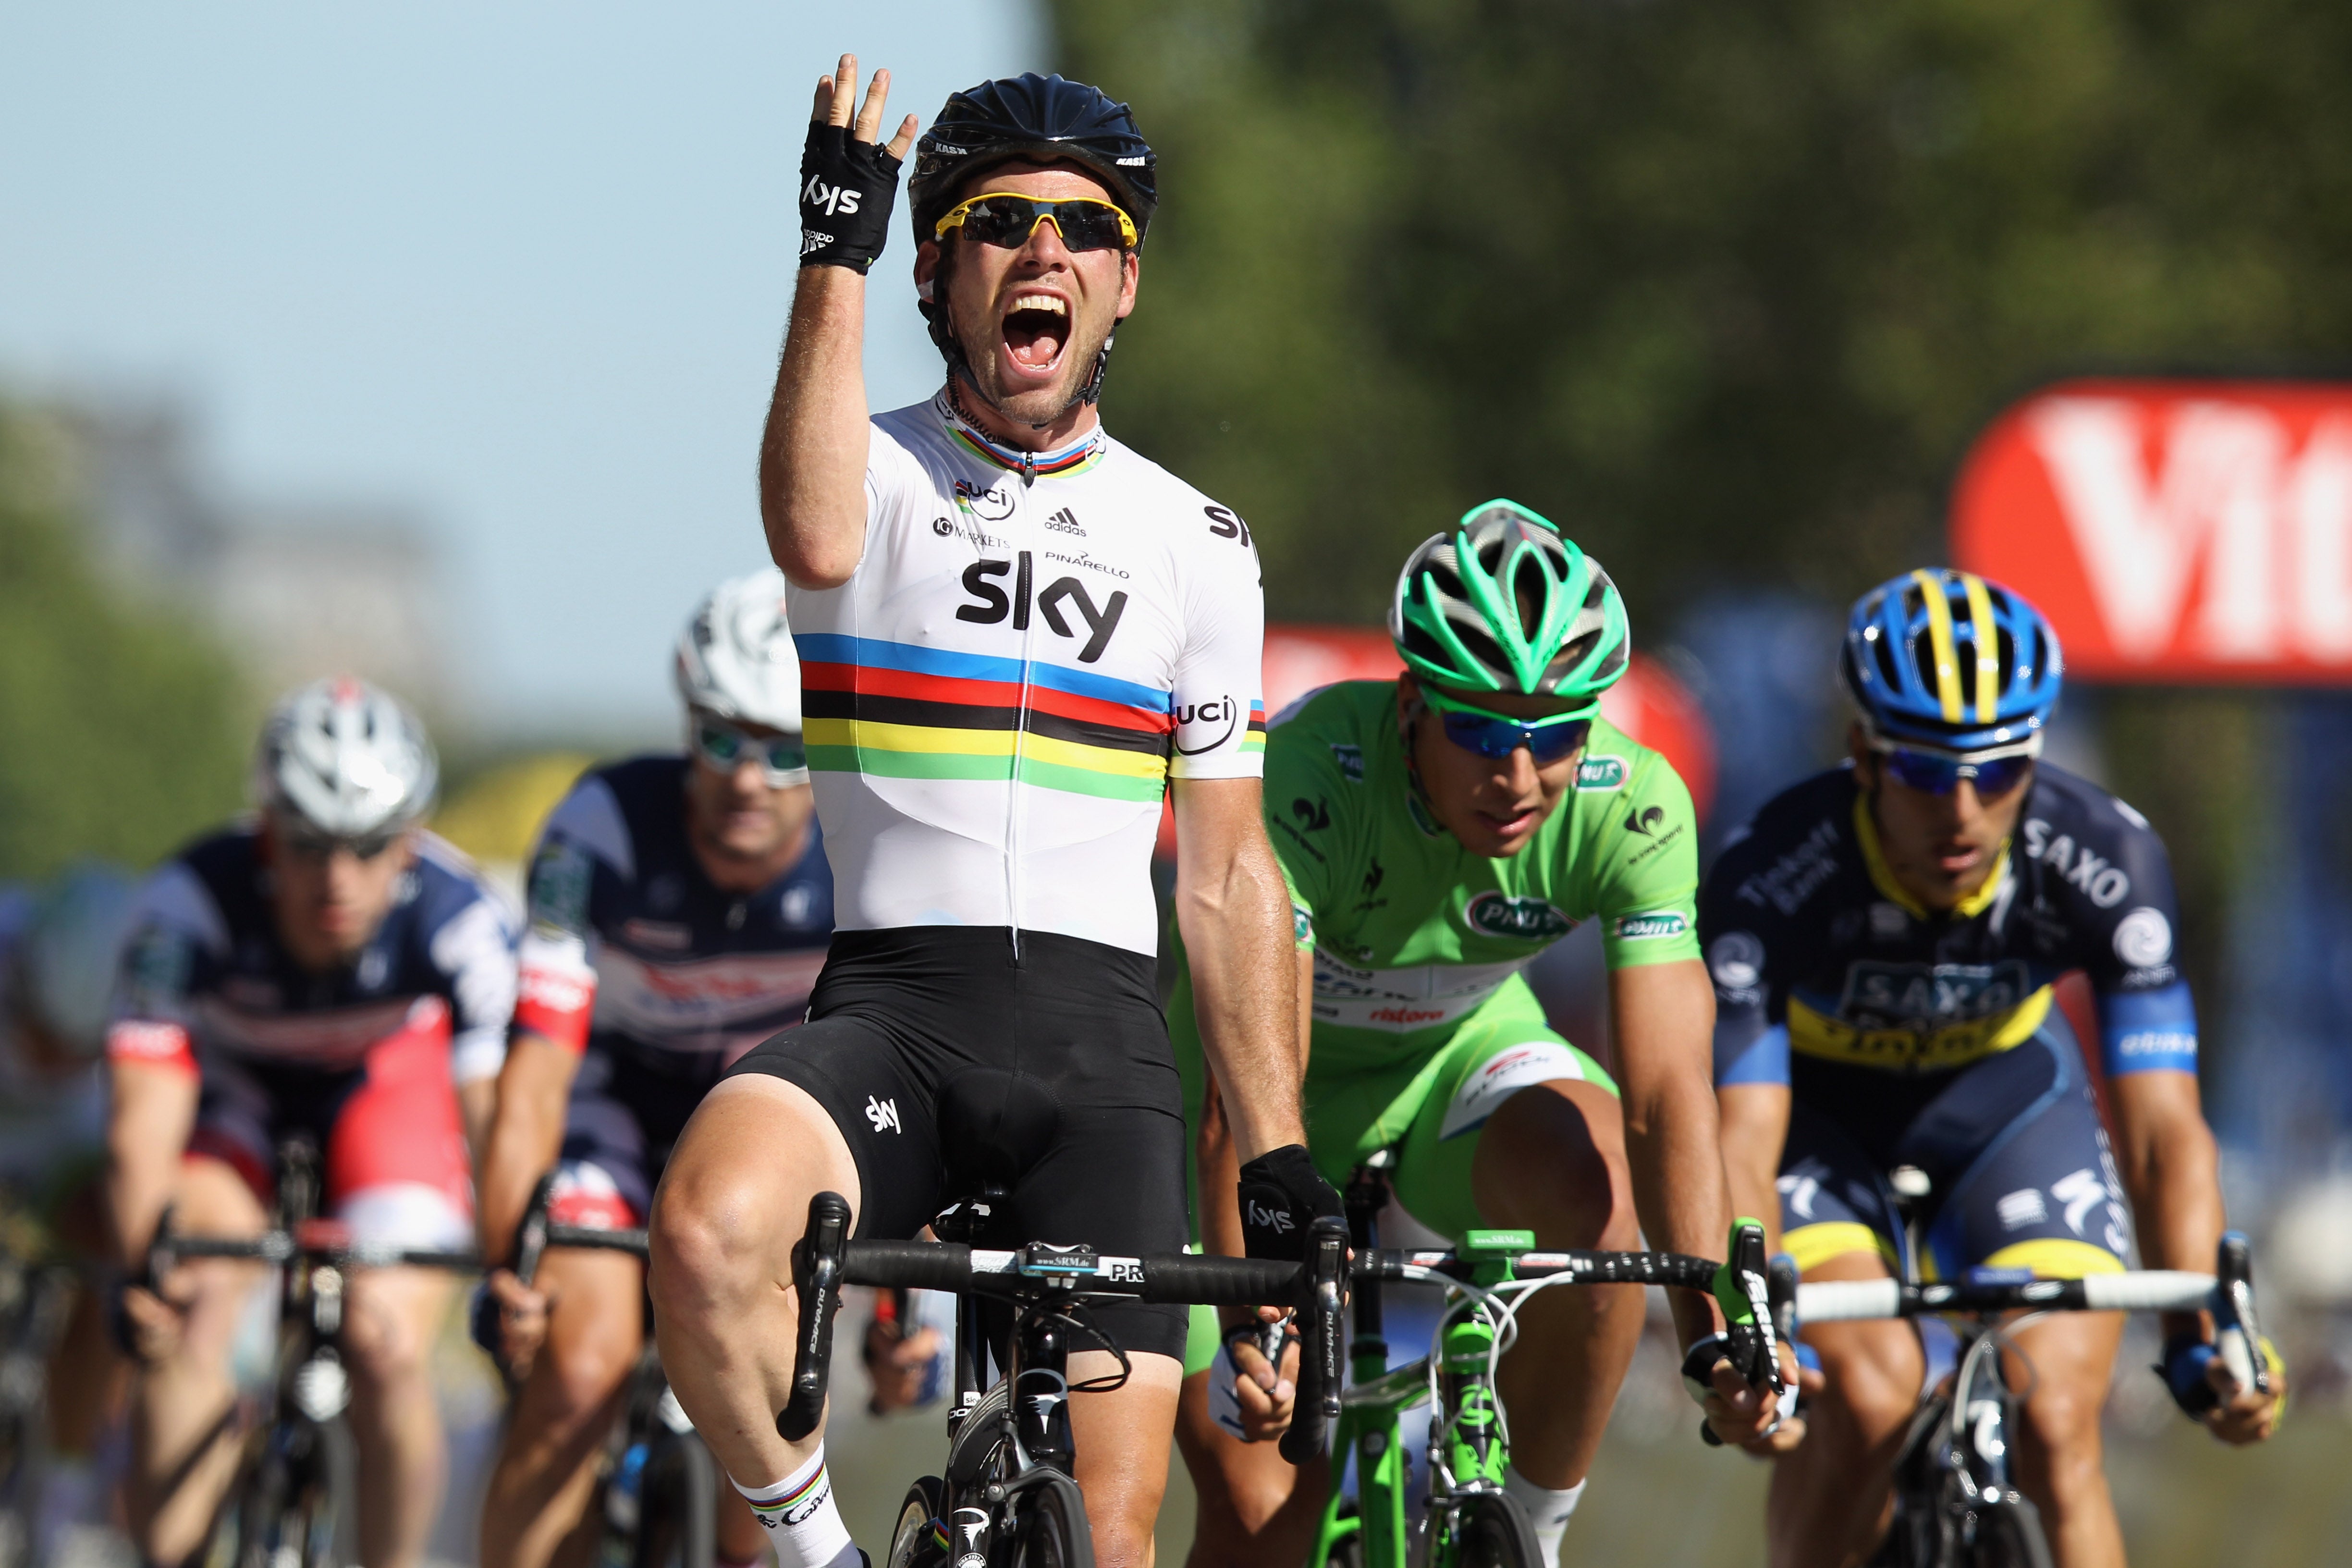 Despite a few wins, thngs didn’t click for Cavendish in his single season with Team Sky